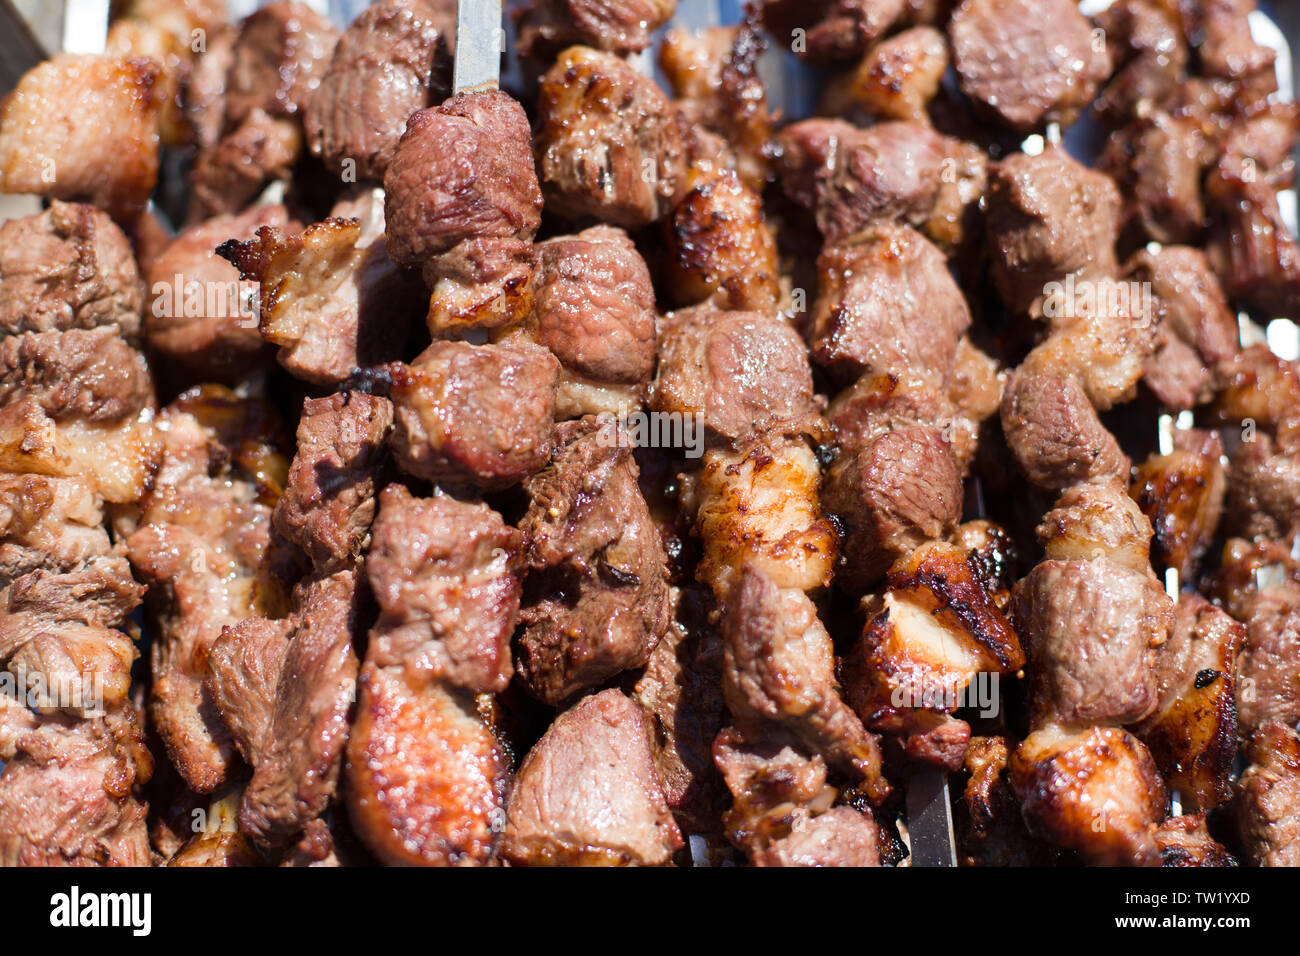 The texture of roasted meat. Appetizing cuts of meat on skewers. Grilled lamb, very tasty food. Kebab background. Stock Photo